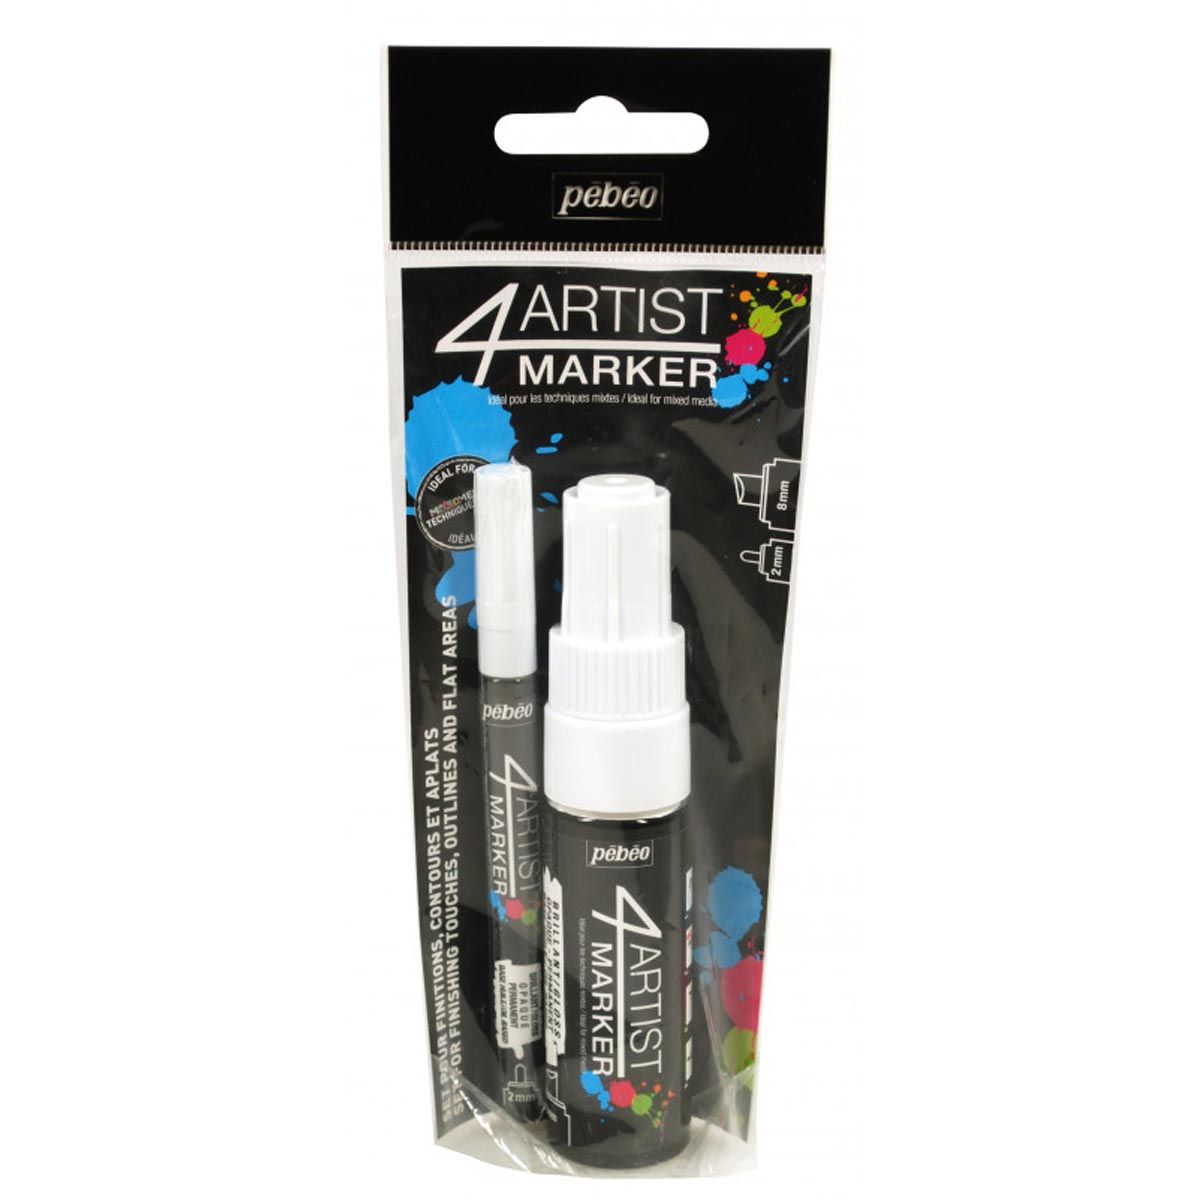 Pébéo 4Artist Marker Duo Set of (2mm+8mm) - White